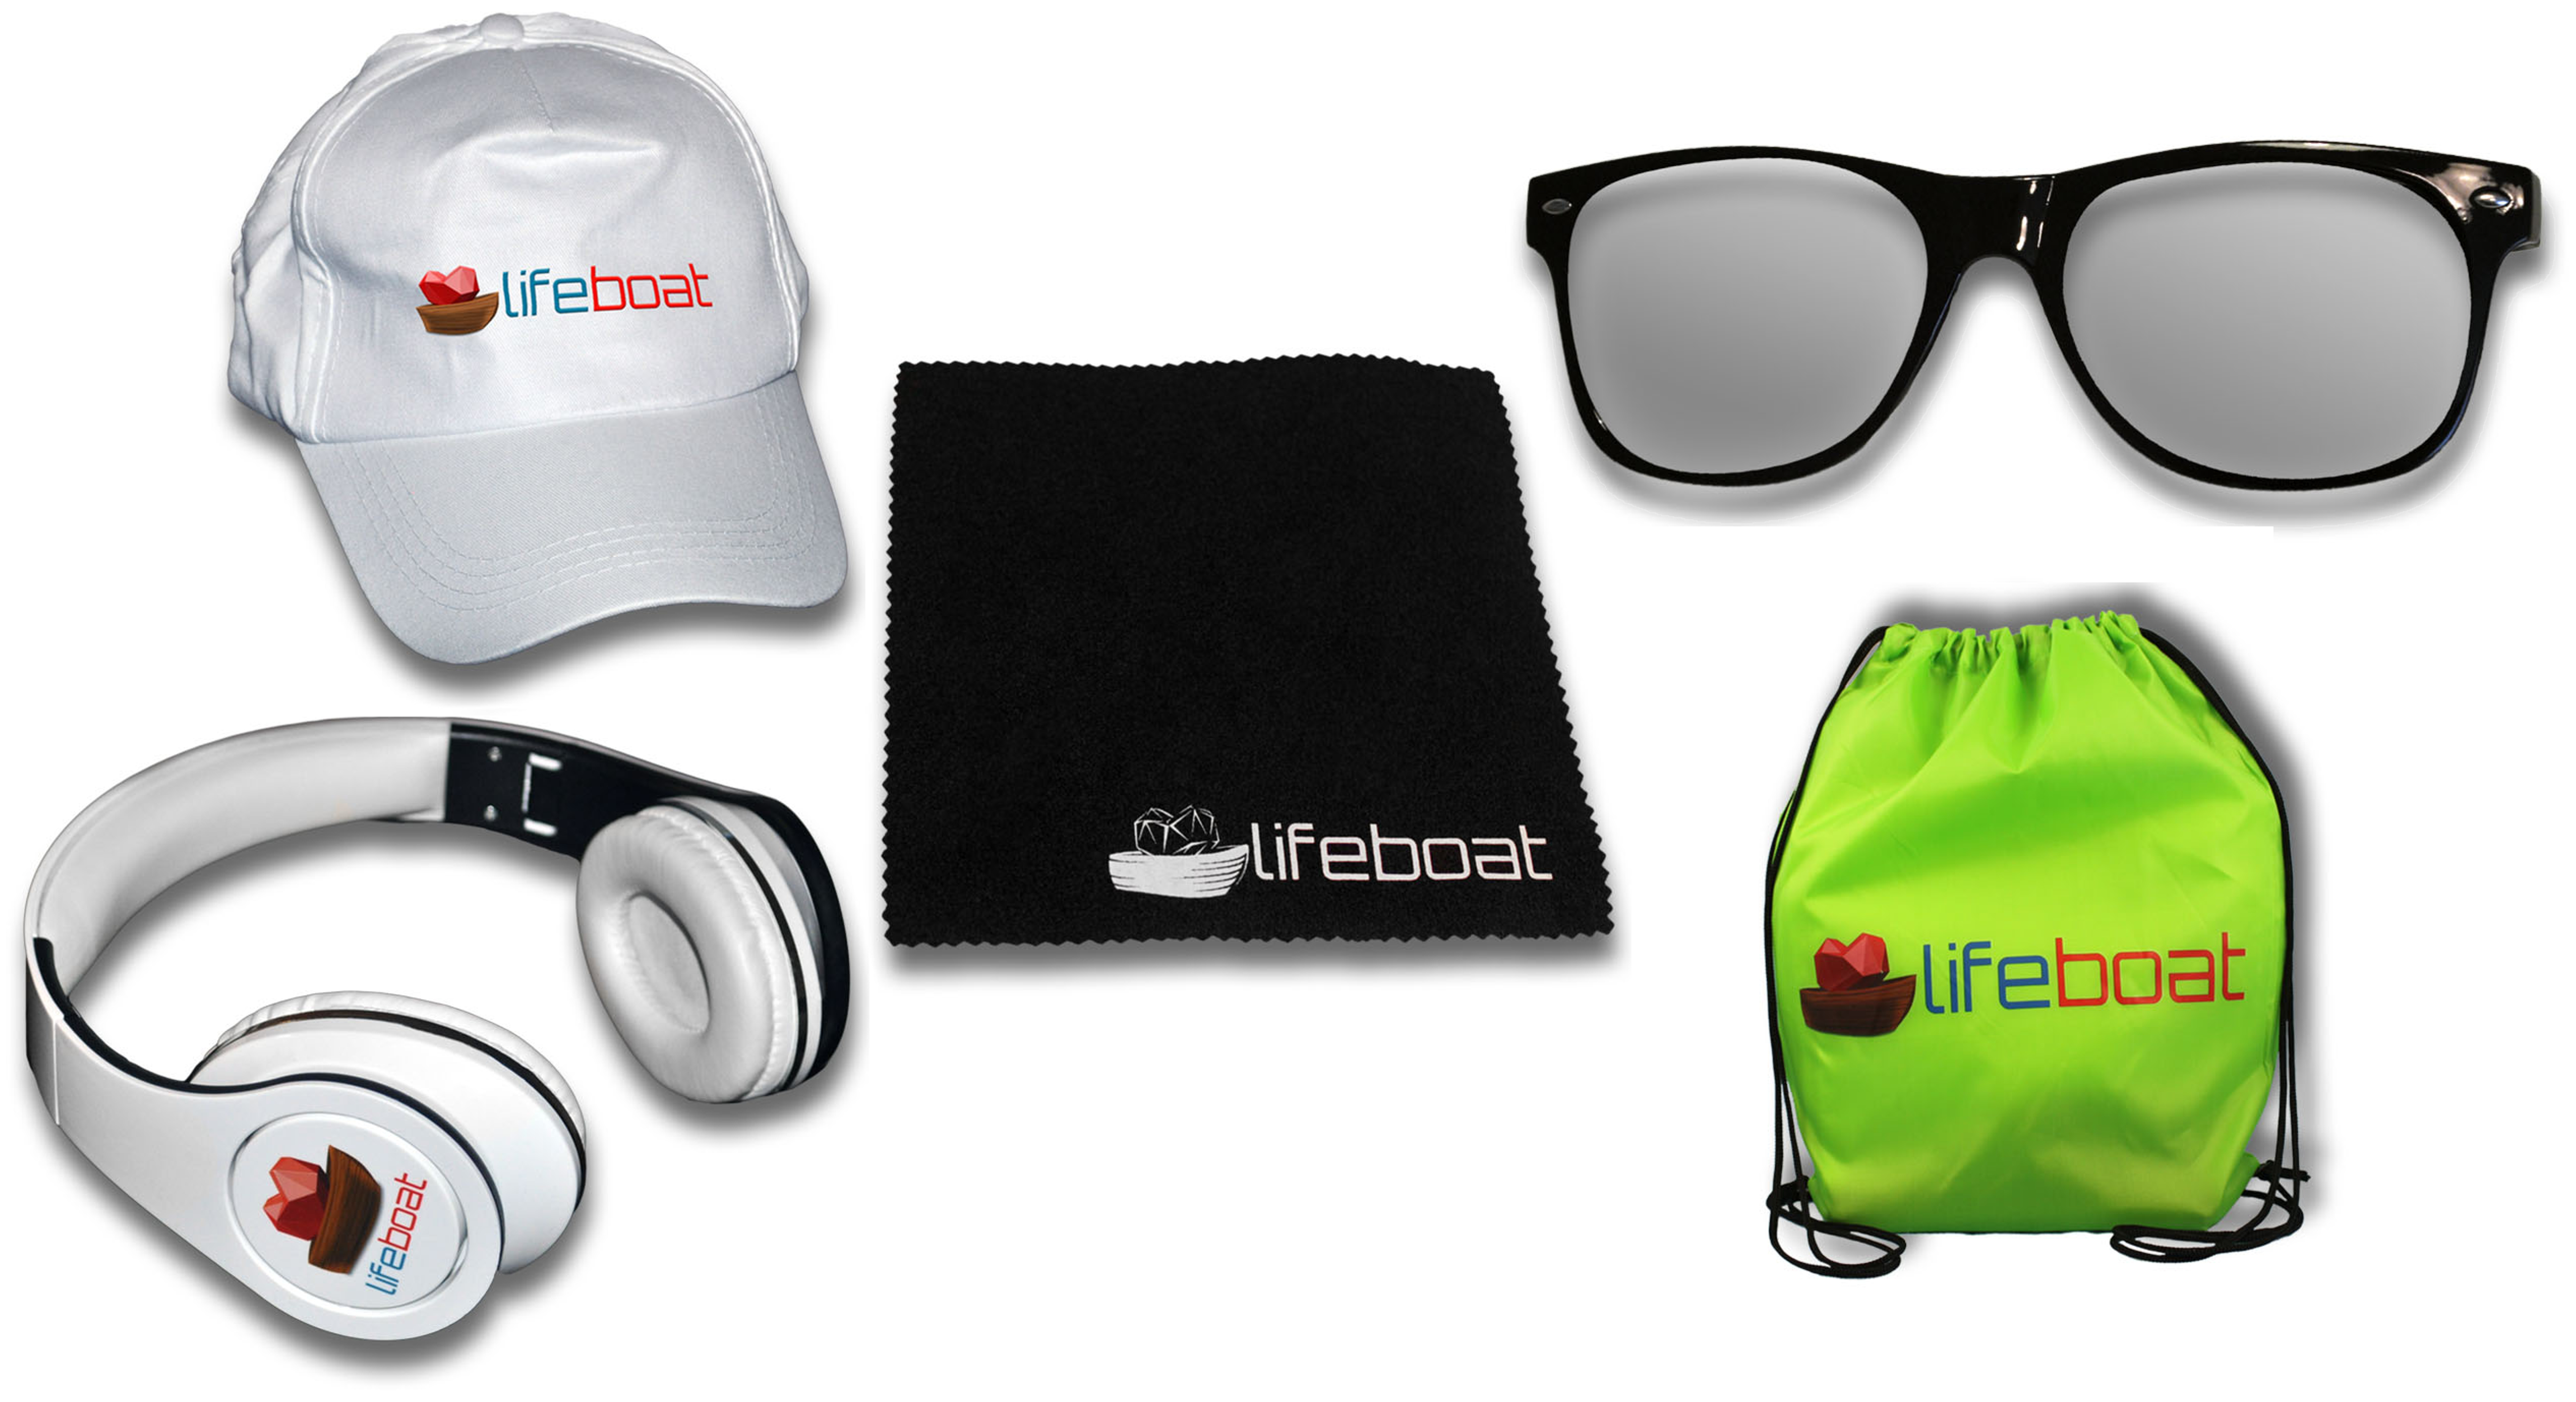 Lifeboat Prize Pack